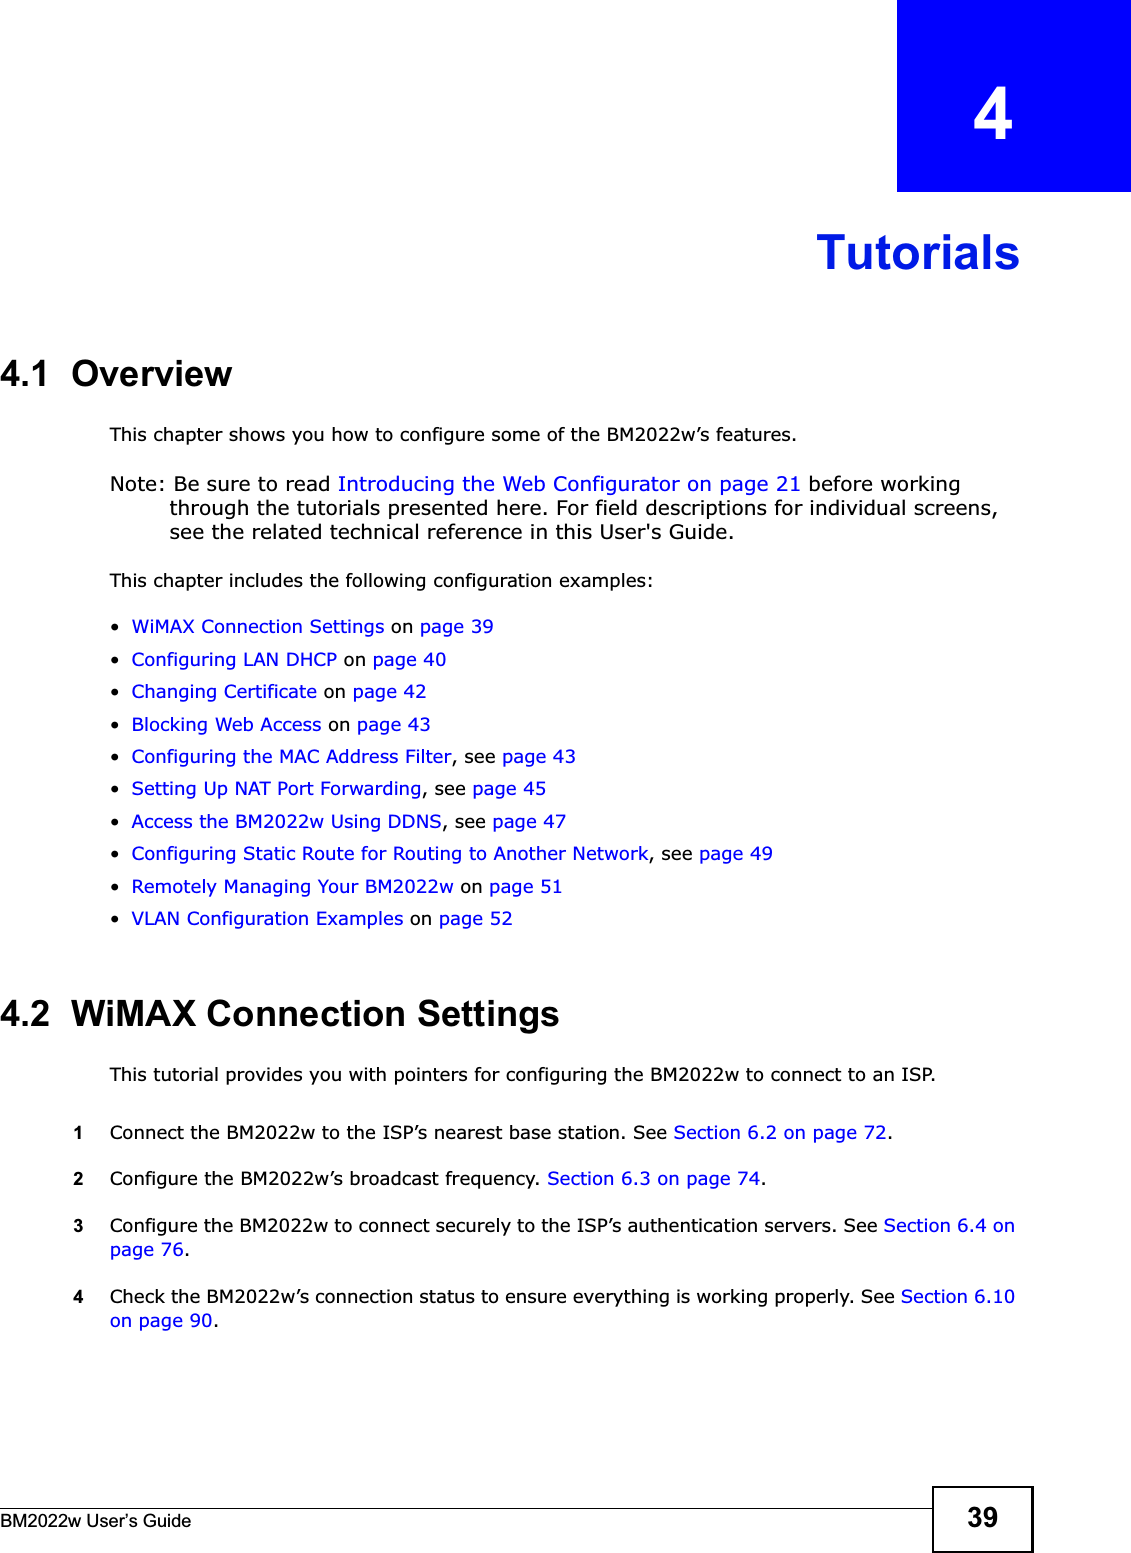 BM2022w User’s Guide 39CHAPTER   4Tutorials4.1  OverviewThis chapter shows you how to configure some of the BM2022w’s features.Note: Be sure to read Introducing the Web Configurator on page 21 before working through the tutorials presented here. For field descriptions for individual screens, see the related technical reference in this User&apos;s Guide.This chapter includes the following configuration examples:•WiMAX Connection Settings on page 39•Configuring LAN DHCP on page 40•Changing Certificate on page 42•Blocking Web Access on page 43•Configuring the MAC Address Filter, see page 43•Setting Up NAT Port Forwarding, see page 45•Access the BM2022w Using DDNS, see page 47•Configuring Static Route for Routing to Another Network, see page 49•Remotely Managing Your BM2022w on page 51•VLAN Configuration Examples on page 524.2  WiMAX Connection SettingsThis tutorial provides you with pointers for configuring the BM2022w to connect to an ISP.1Connect the BM2022w to the ISP’s nearest base station. See Section 6.2 on page 72.2Configure the BM2022w’s broadcast frequency. Section 6.3 on page 74.3Configure the BM2022w to connect securely to the ISP’s authentication servers. See Section 6.4 on page 76.4Check the BM2022w’s connection status to ensure everything is working properly. See Section 6.10 on page 90.